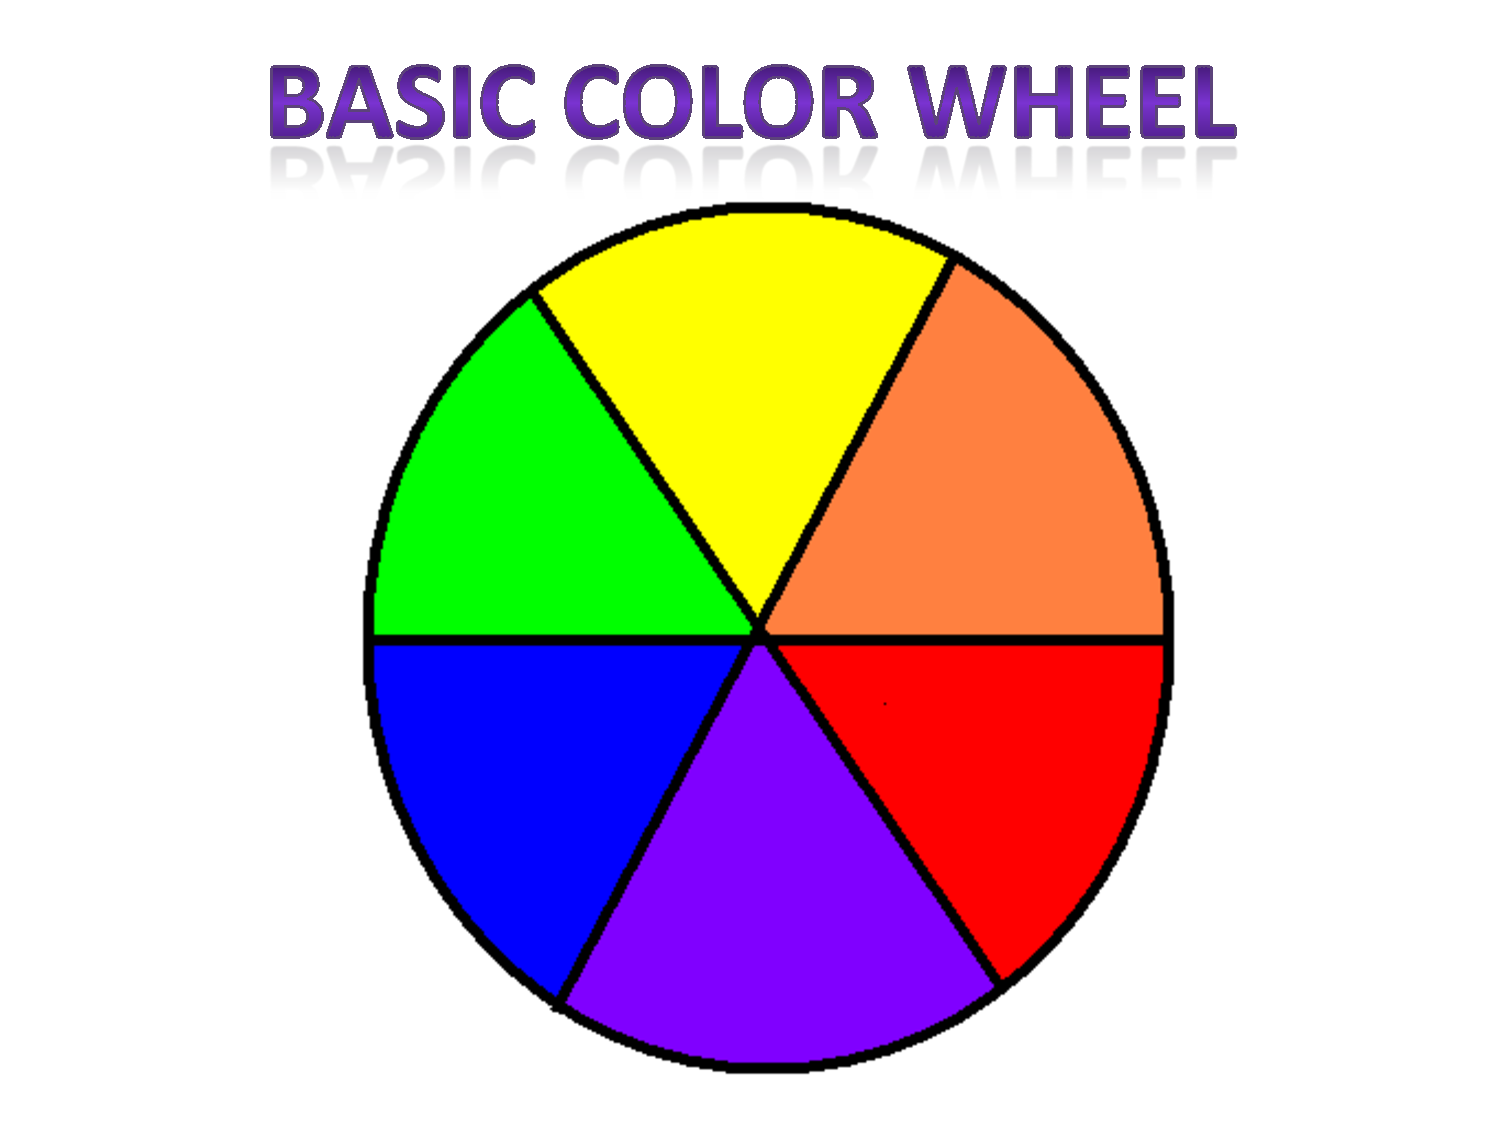 5 Best Images of Basic Color Wheel Template Printable - Basic ...